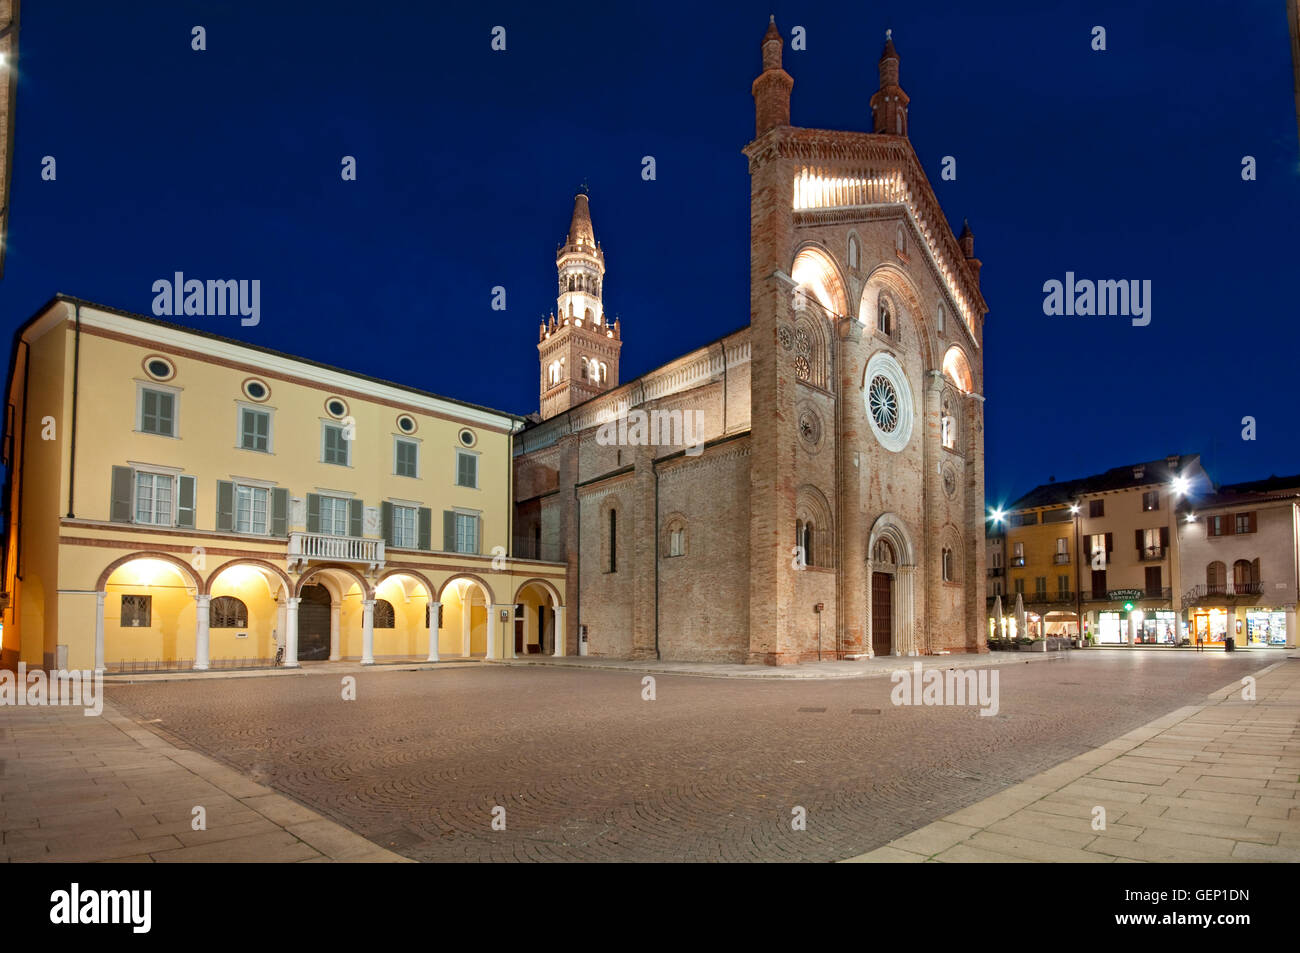 Italy, Lombardy, Crema, Piazza Duomo Square, Cathedral Stock Photo - Alamy